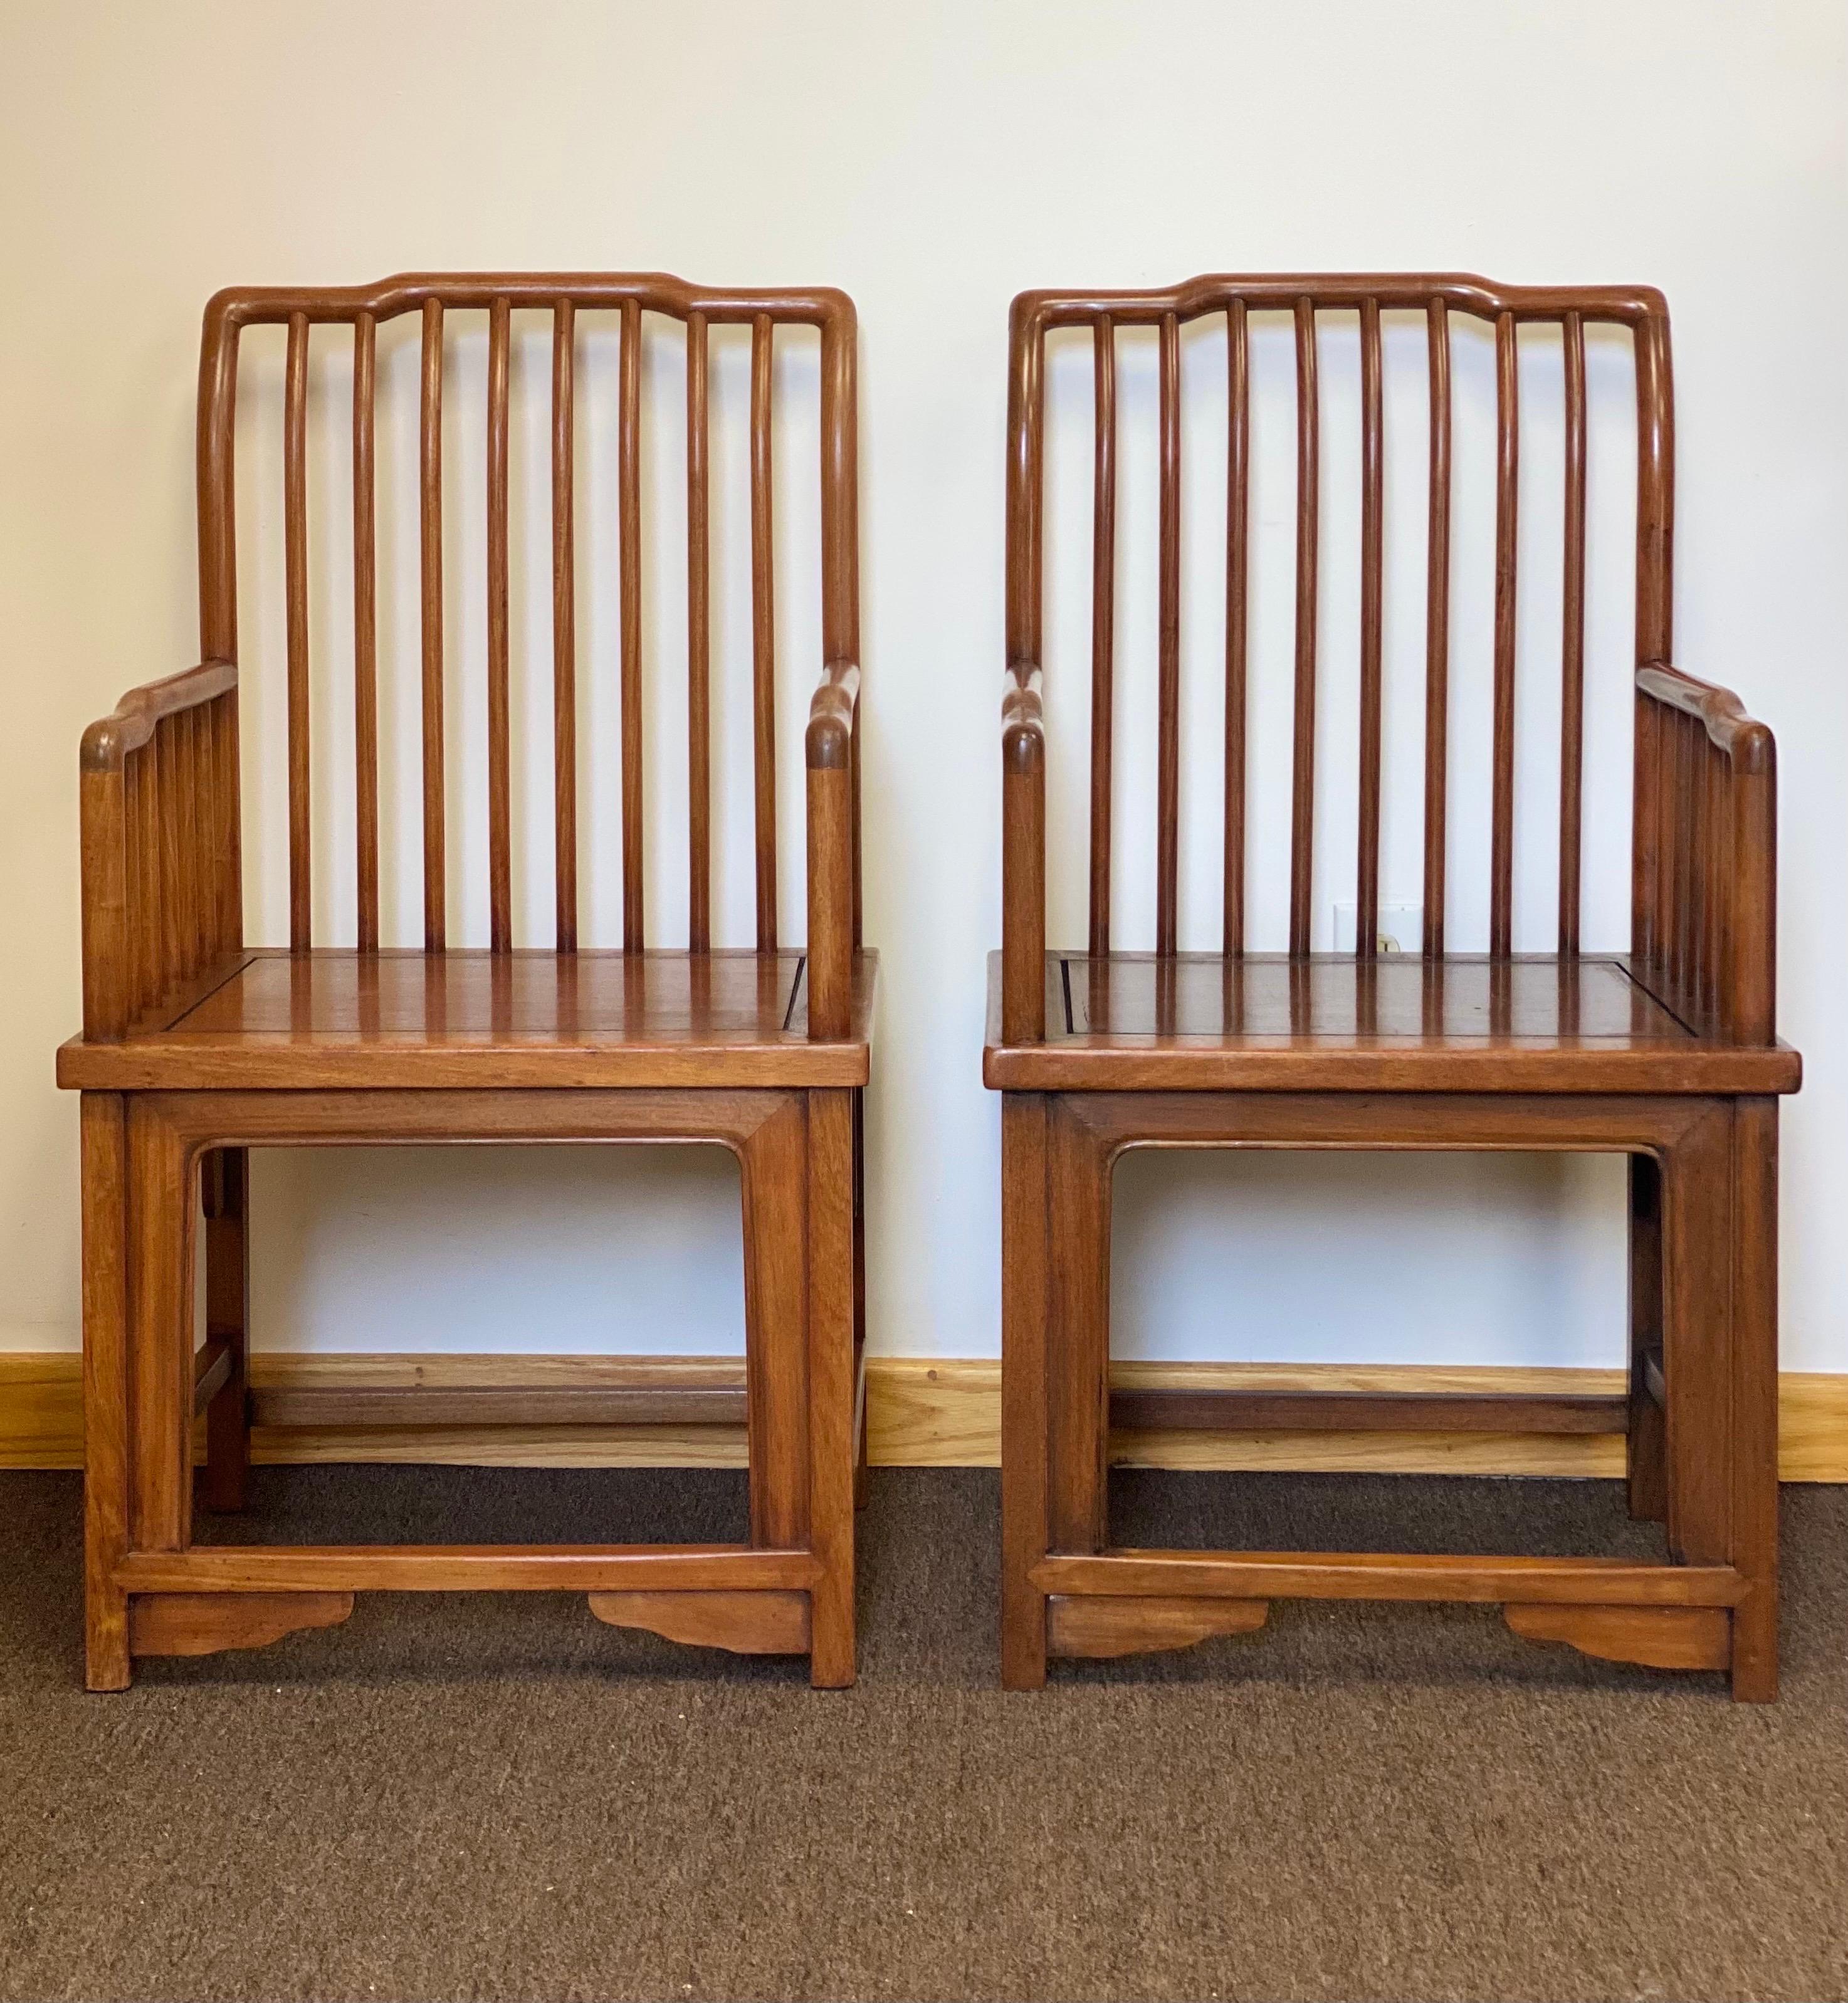 We are very pleased to offer a pair of beautiful Chinese Ming Style armchairs, circa the early 19th century. This structural, clean-lined pair is handcrafted of solid hardwood with a slatted back and armrests. The front opening underneath the seat